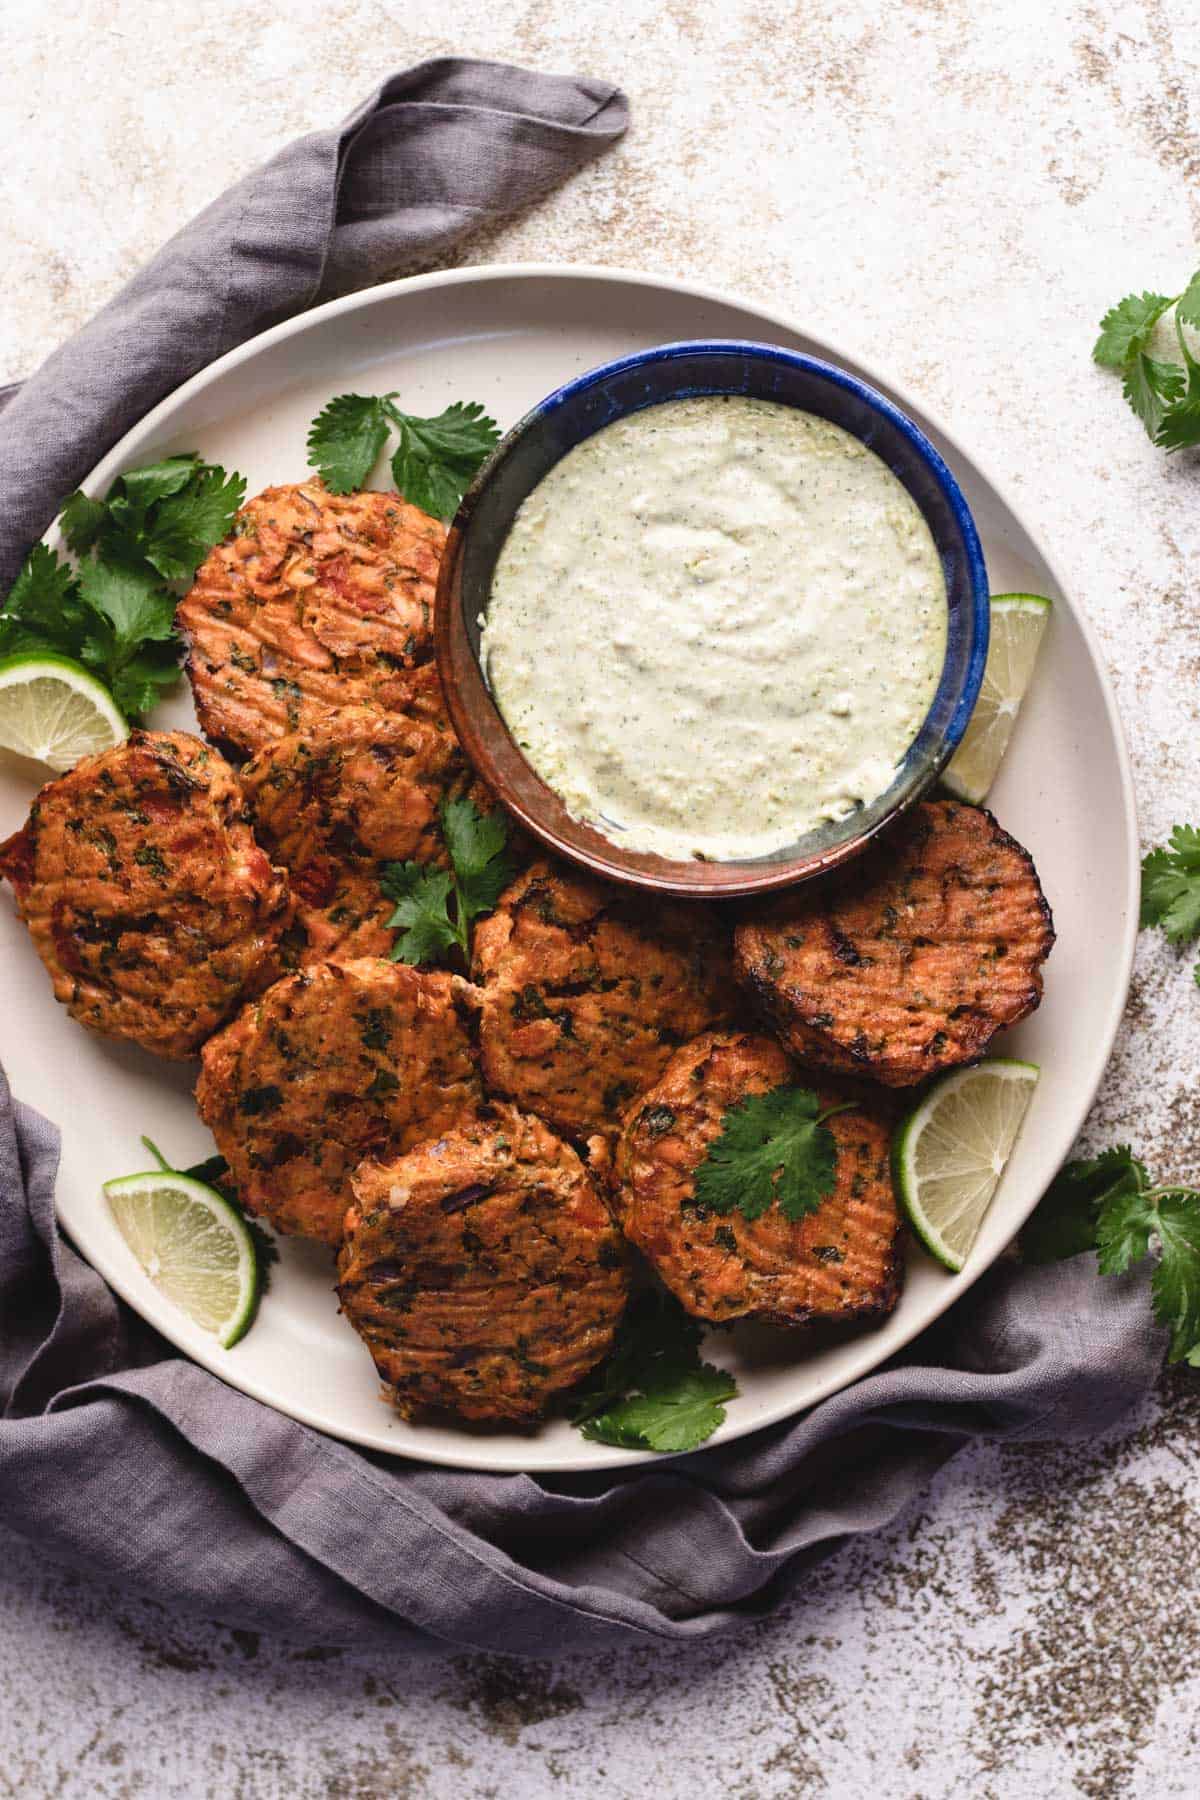 Southwestern salmon cakes on a large plate.